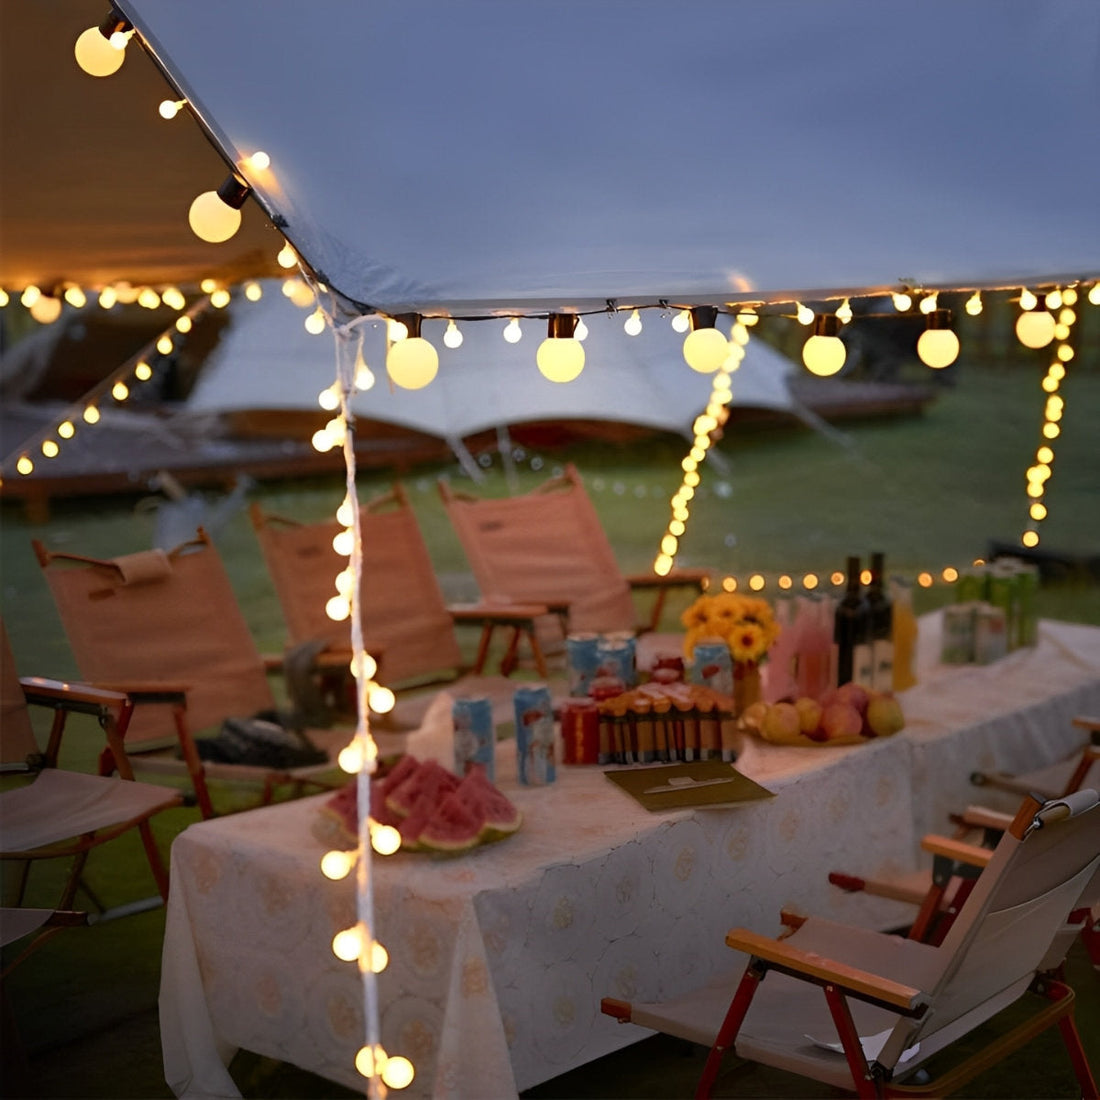 LED Solar Powered Outdoor Tent Canopy String Lights Camping Decor Light Round Balls Valentine Garland Bulb Decoration Fairy Lights Ball Bubble Lights - Flyachilles